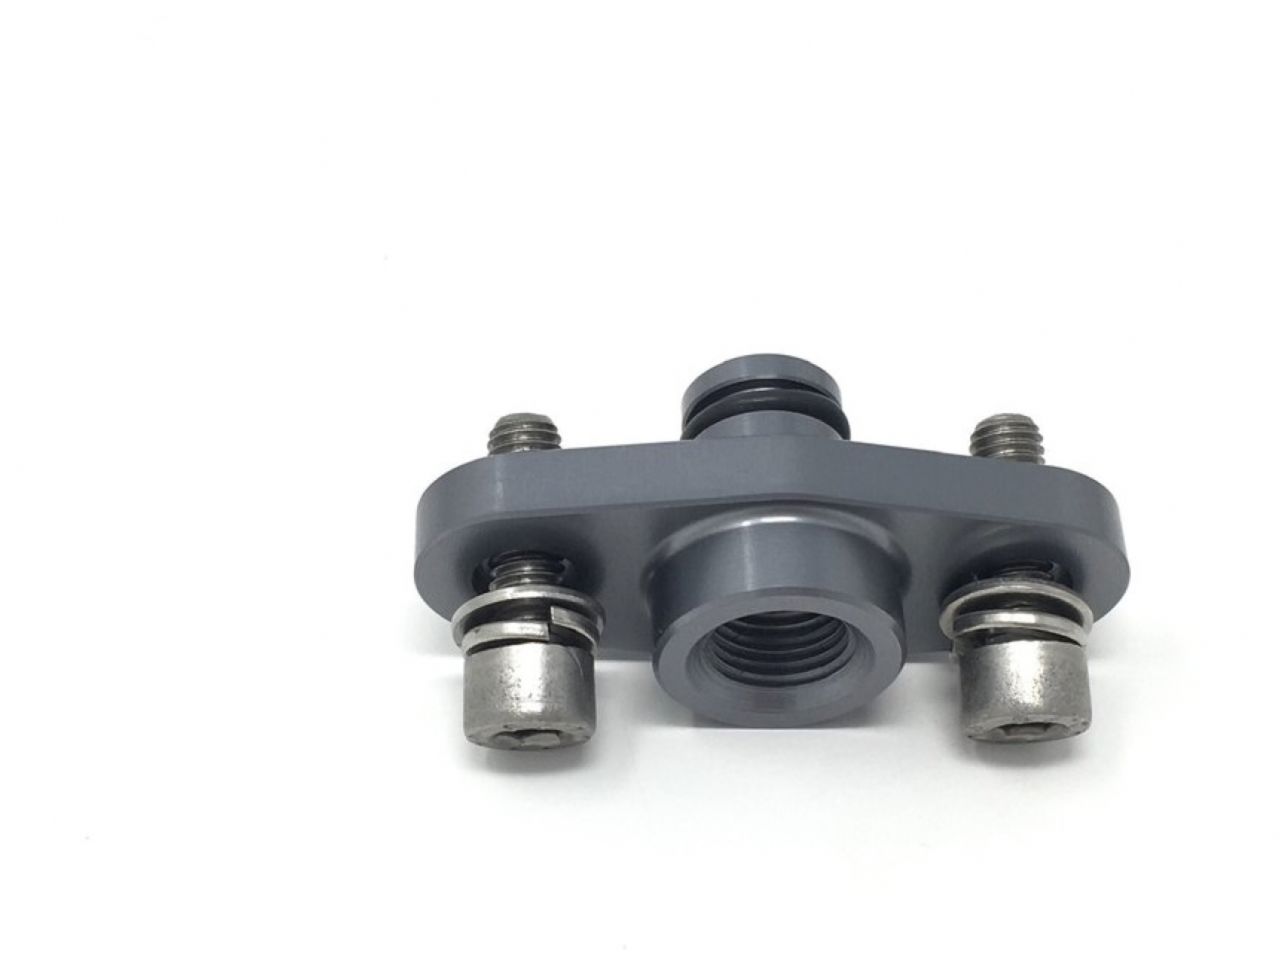 Diftech Fuel Fittings and Adapters 10009 Item Image